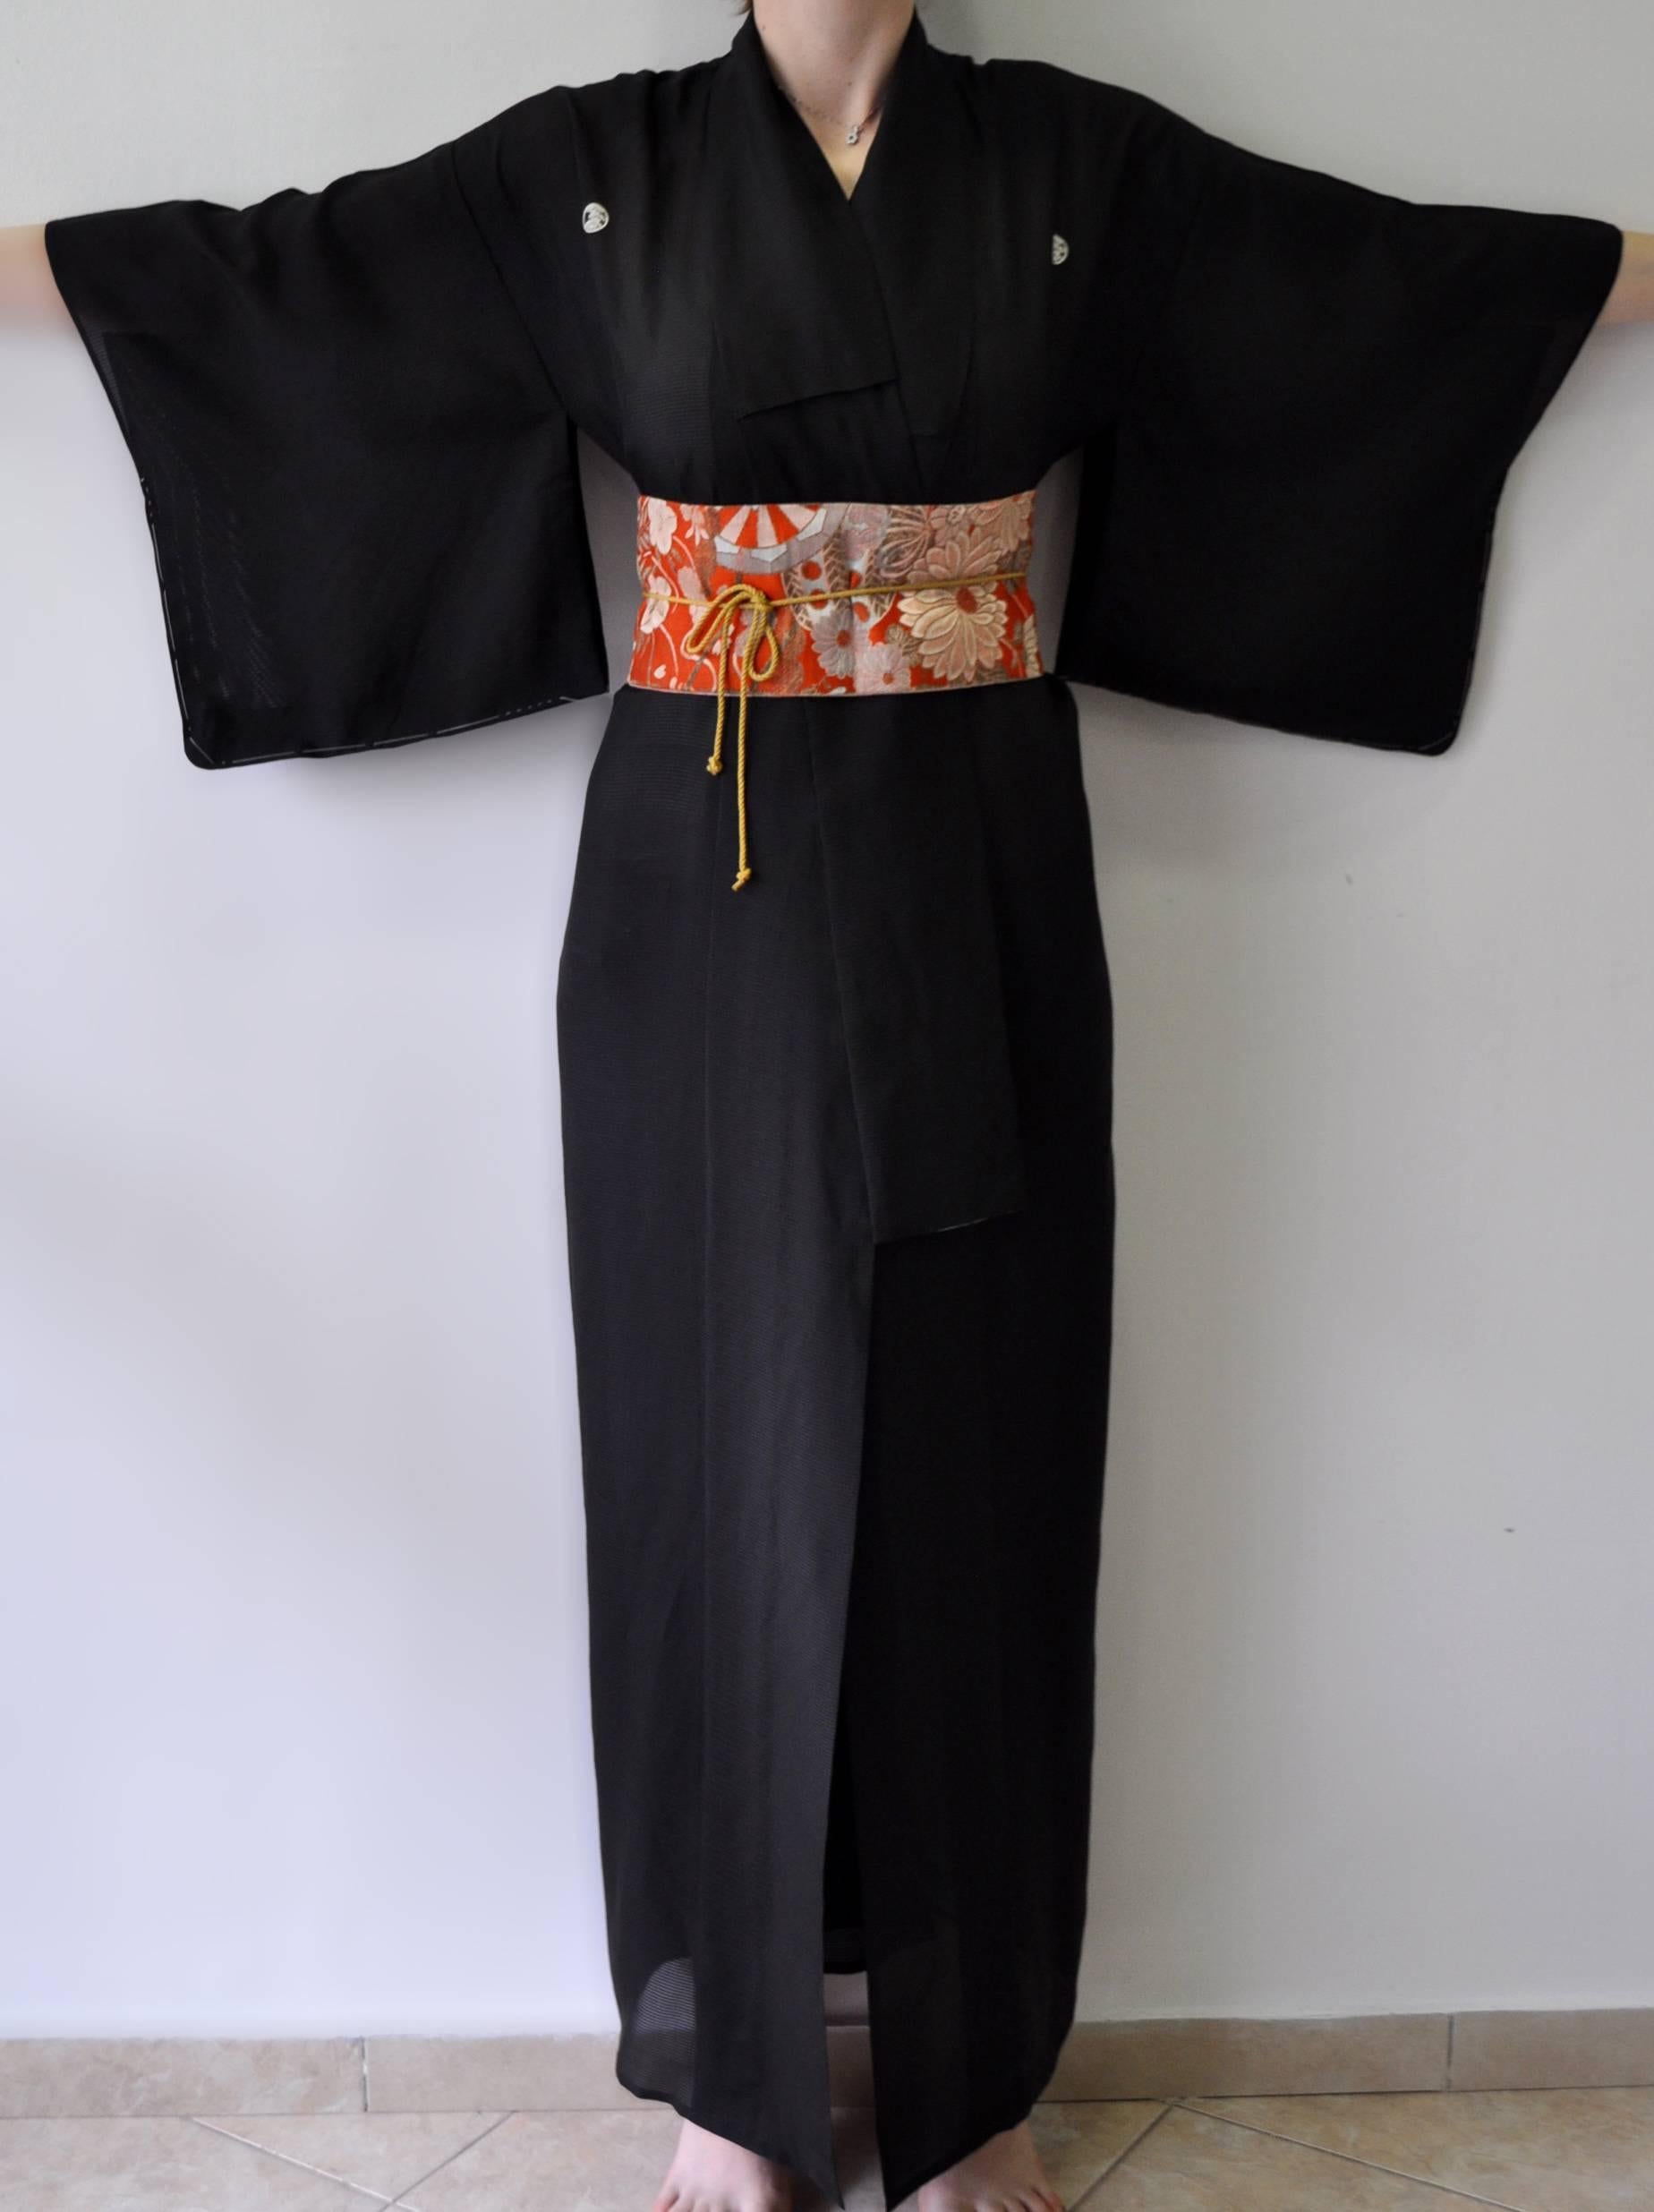 This is a vintage Japanese garment made from exquisite material wonderful artwork, hand made with meticulous workmanship; an item that was vastly expensive when first bought. A touch of the history and tradition of old japan; an item that is so